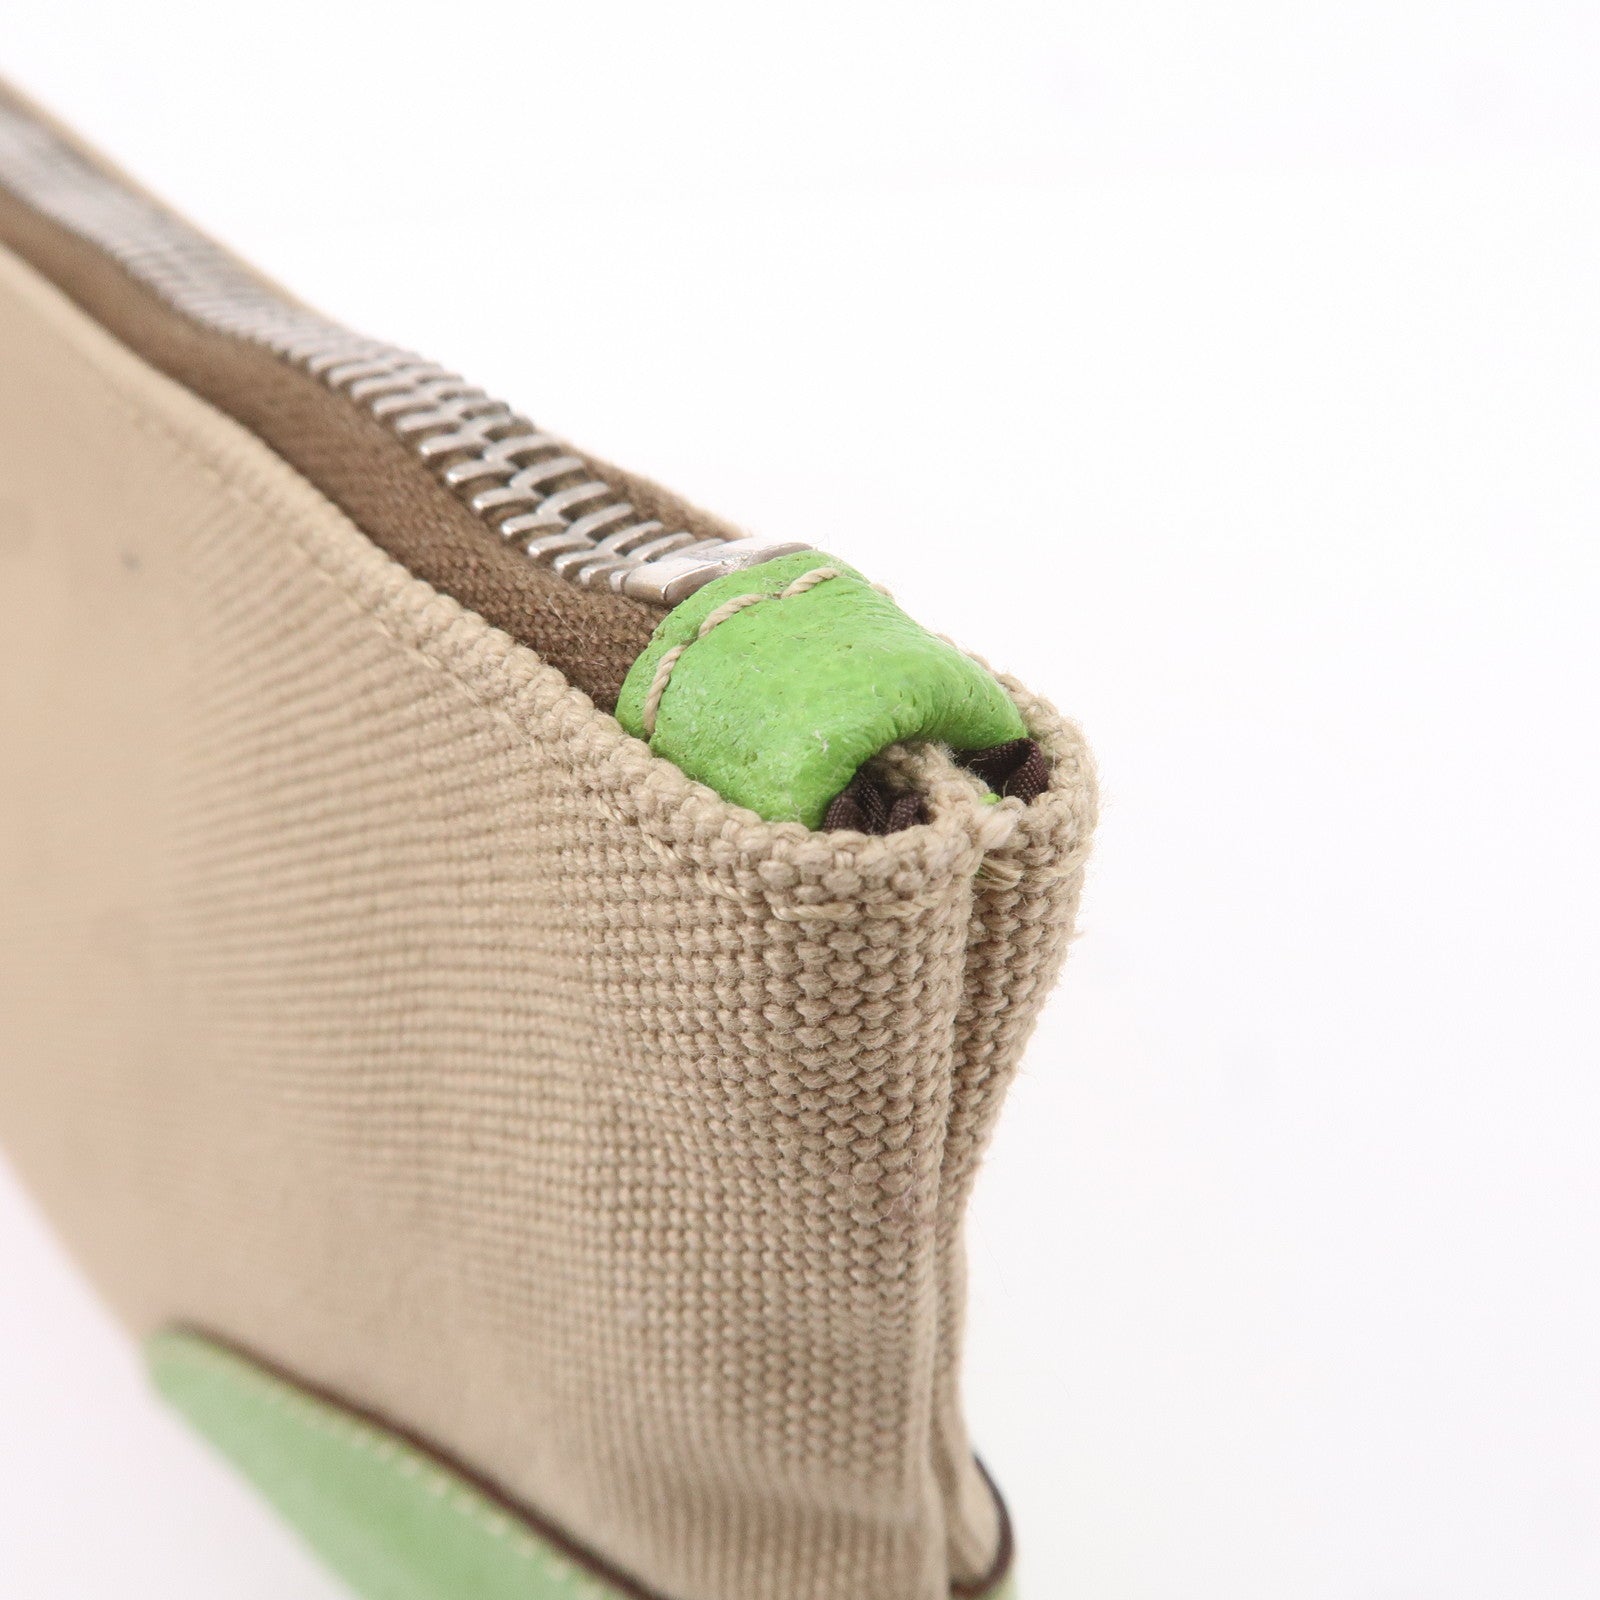 PARDA-Canvas-Leather-Pouch-Clutch-Bag-Beige-Green-VA0011 – dct